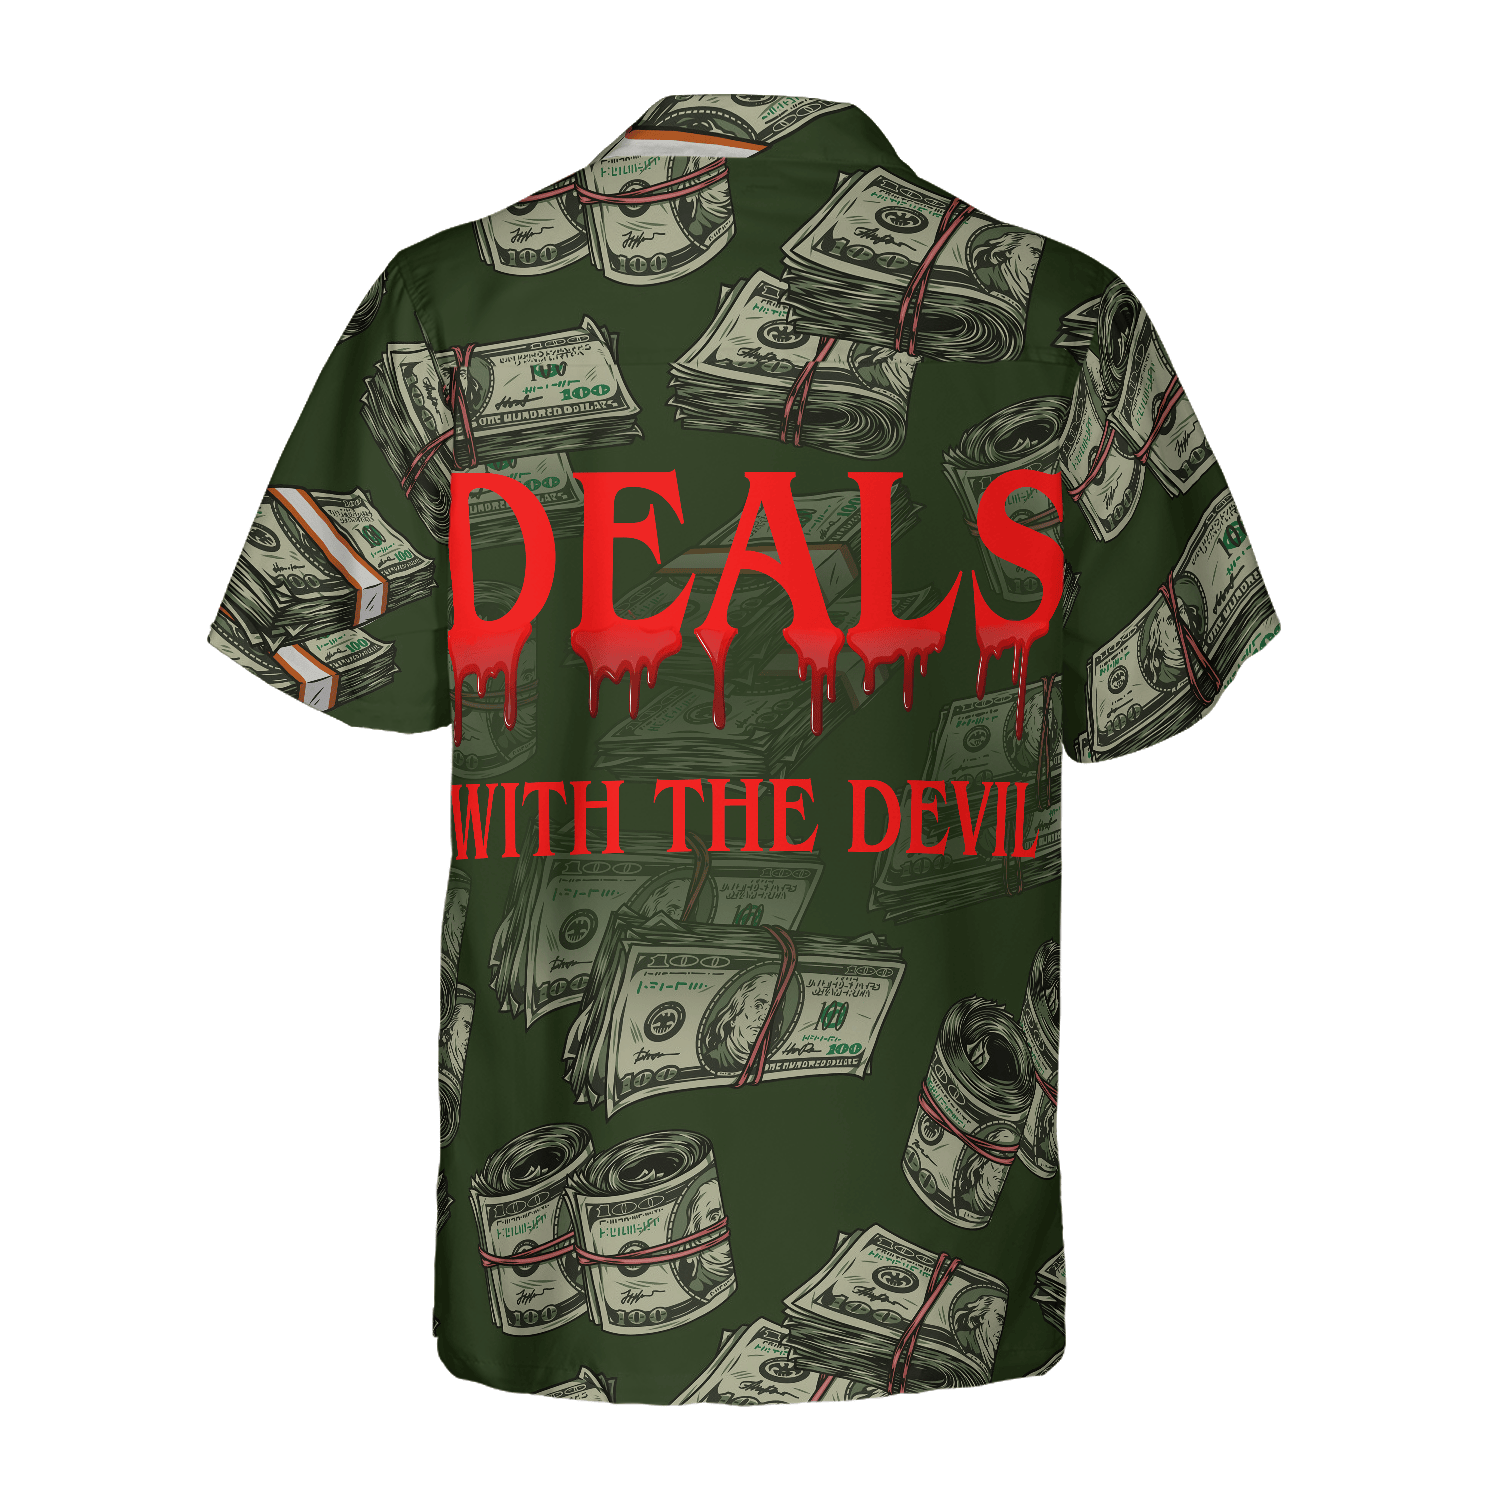 Deals With The Devil Gothic Hawaiian Shirt, Stylish Goth Shirt For Men And Women